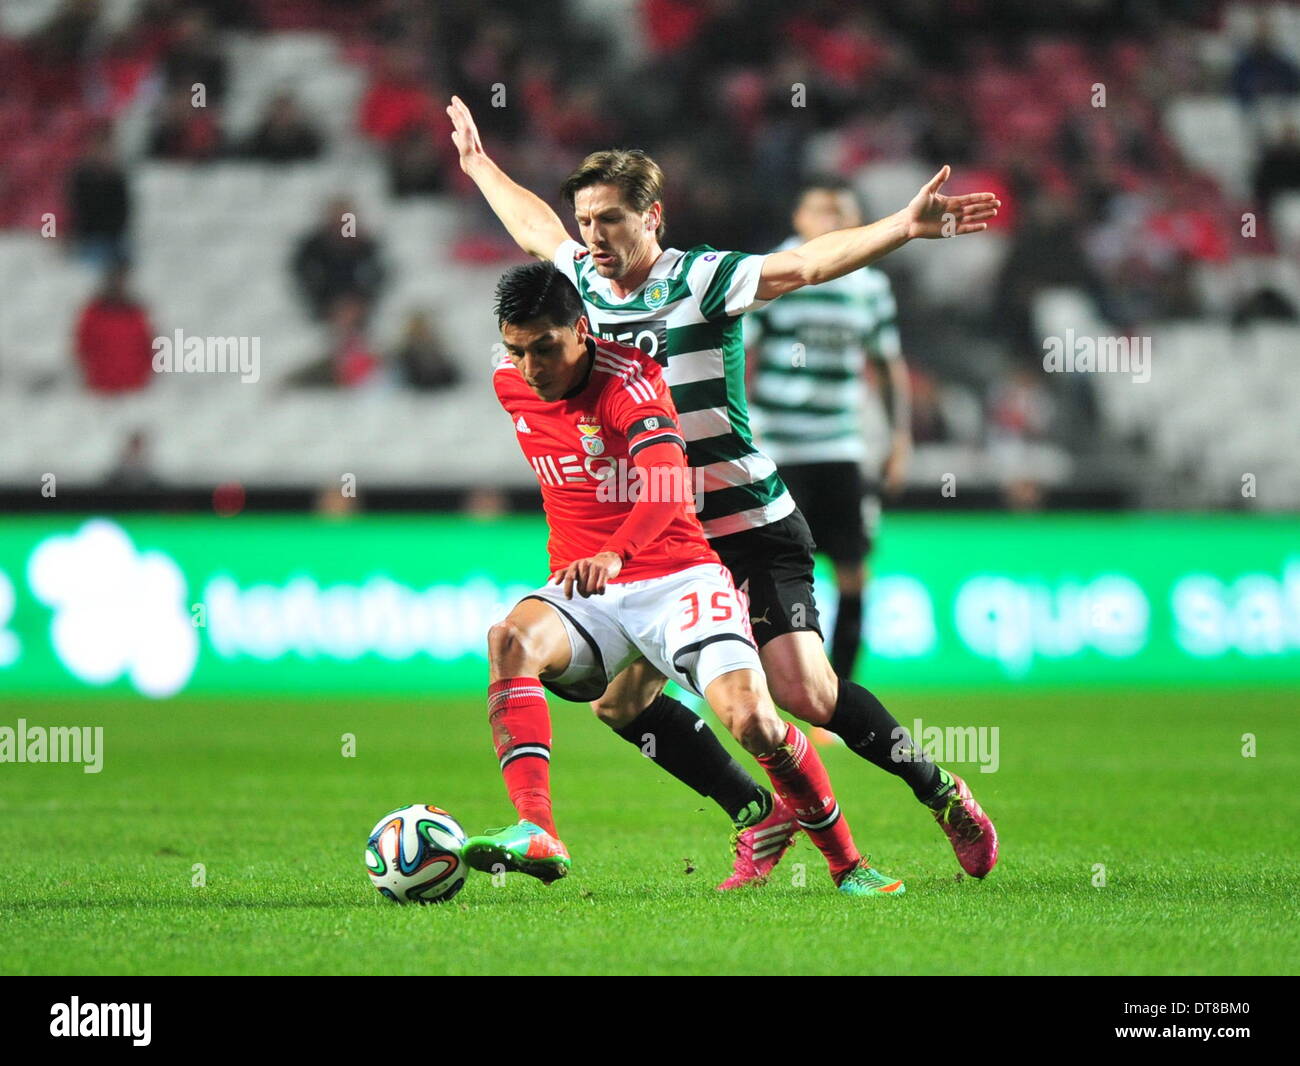 Lisbon. 11th Feb, 2014. Benfica's Enzo Perez (L) fights for the ball with Sporting's Adrien silva during their Portuguese Premier League soccer match at Luz stadium in Lisbon, Portugal on Feb. 11, 2014. Benfica won 2-0. © Zhang Liyun/Xinhua/Alamy Live News Stock Photo